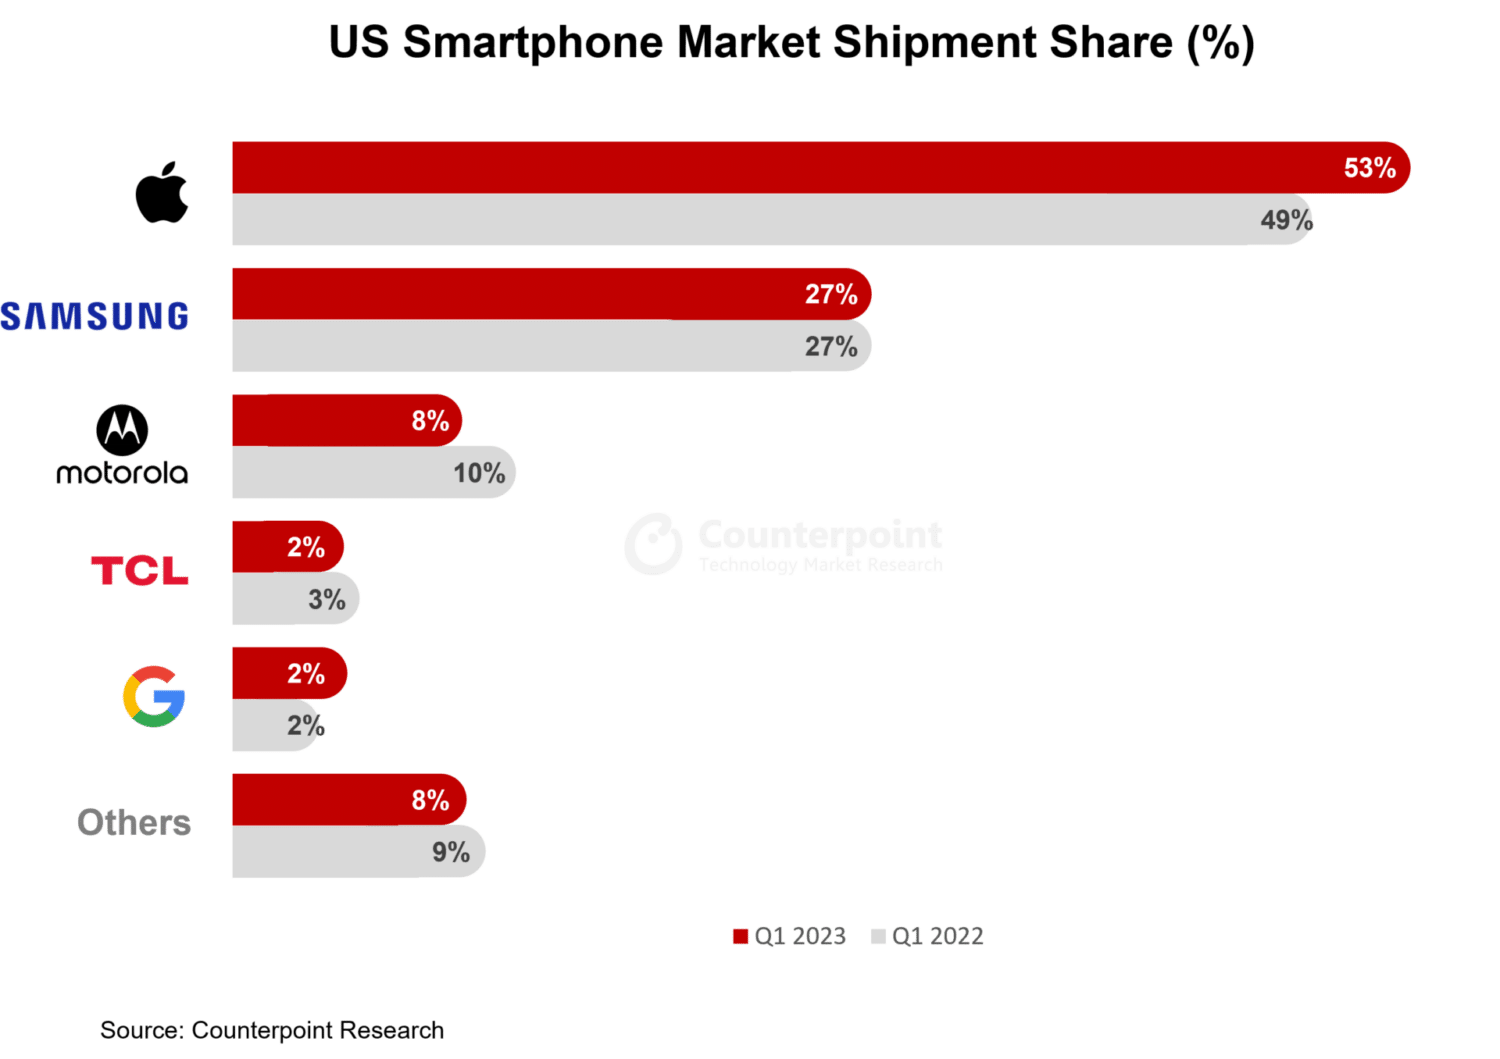 US iPhone Market Share Spikes as Smartphone Market Declines